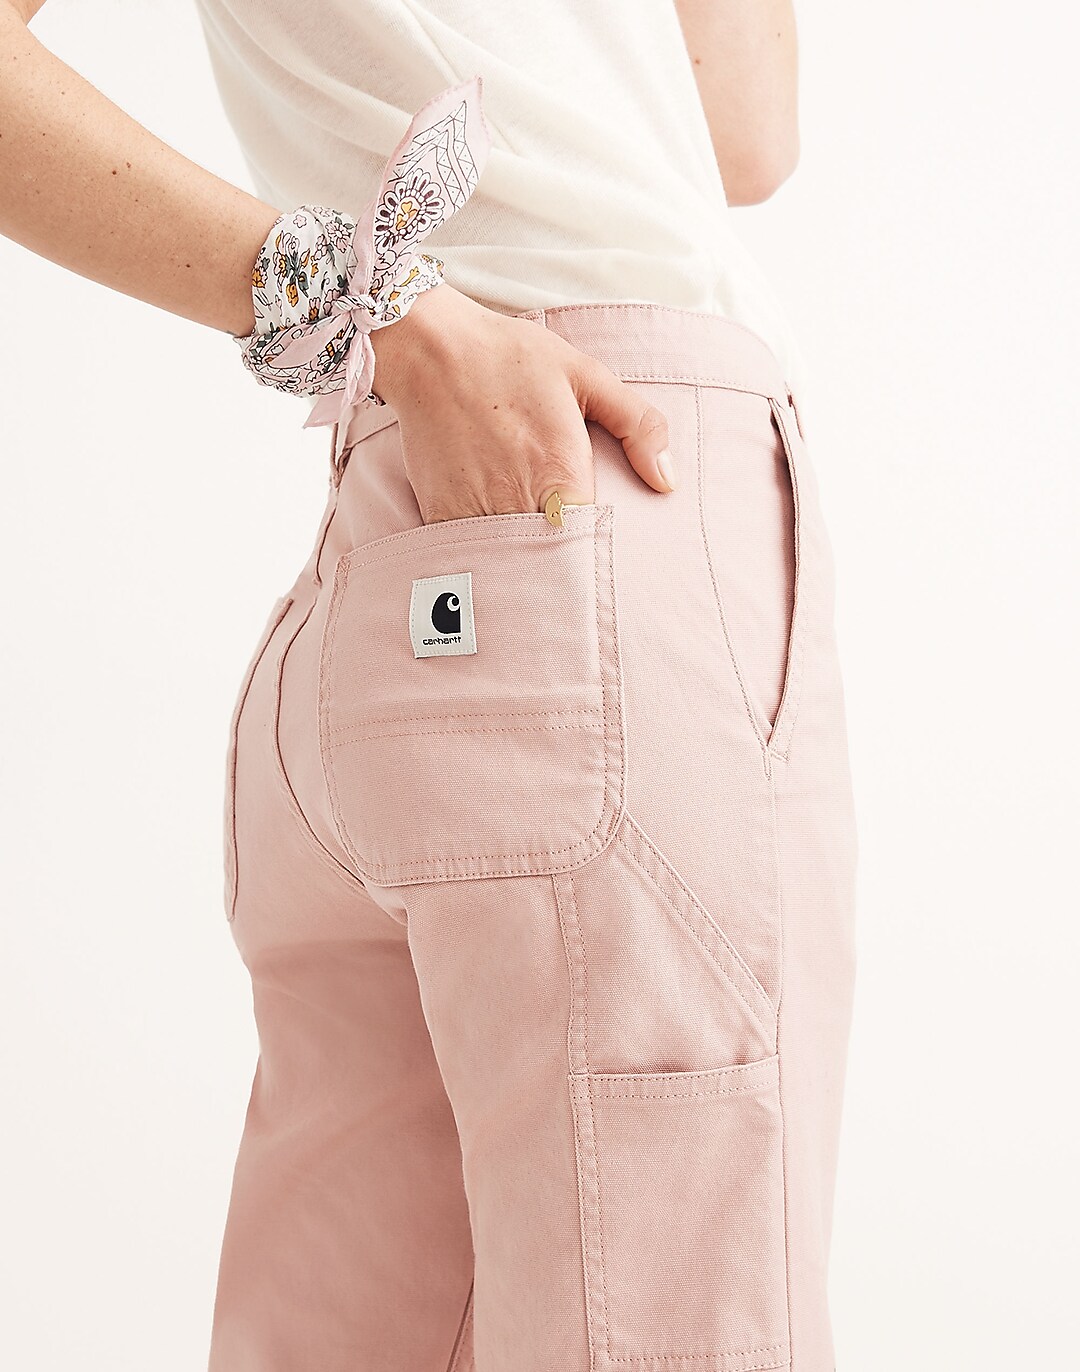 Carhartt Work In Progress - Pierce Pant  HBX - Globally Curated Fashion  and Lifestyle by Hypebeast